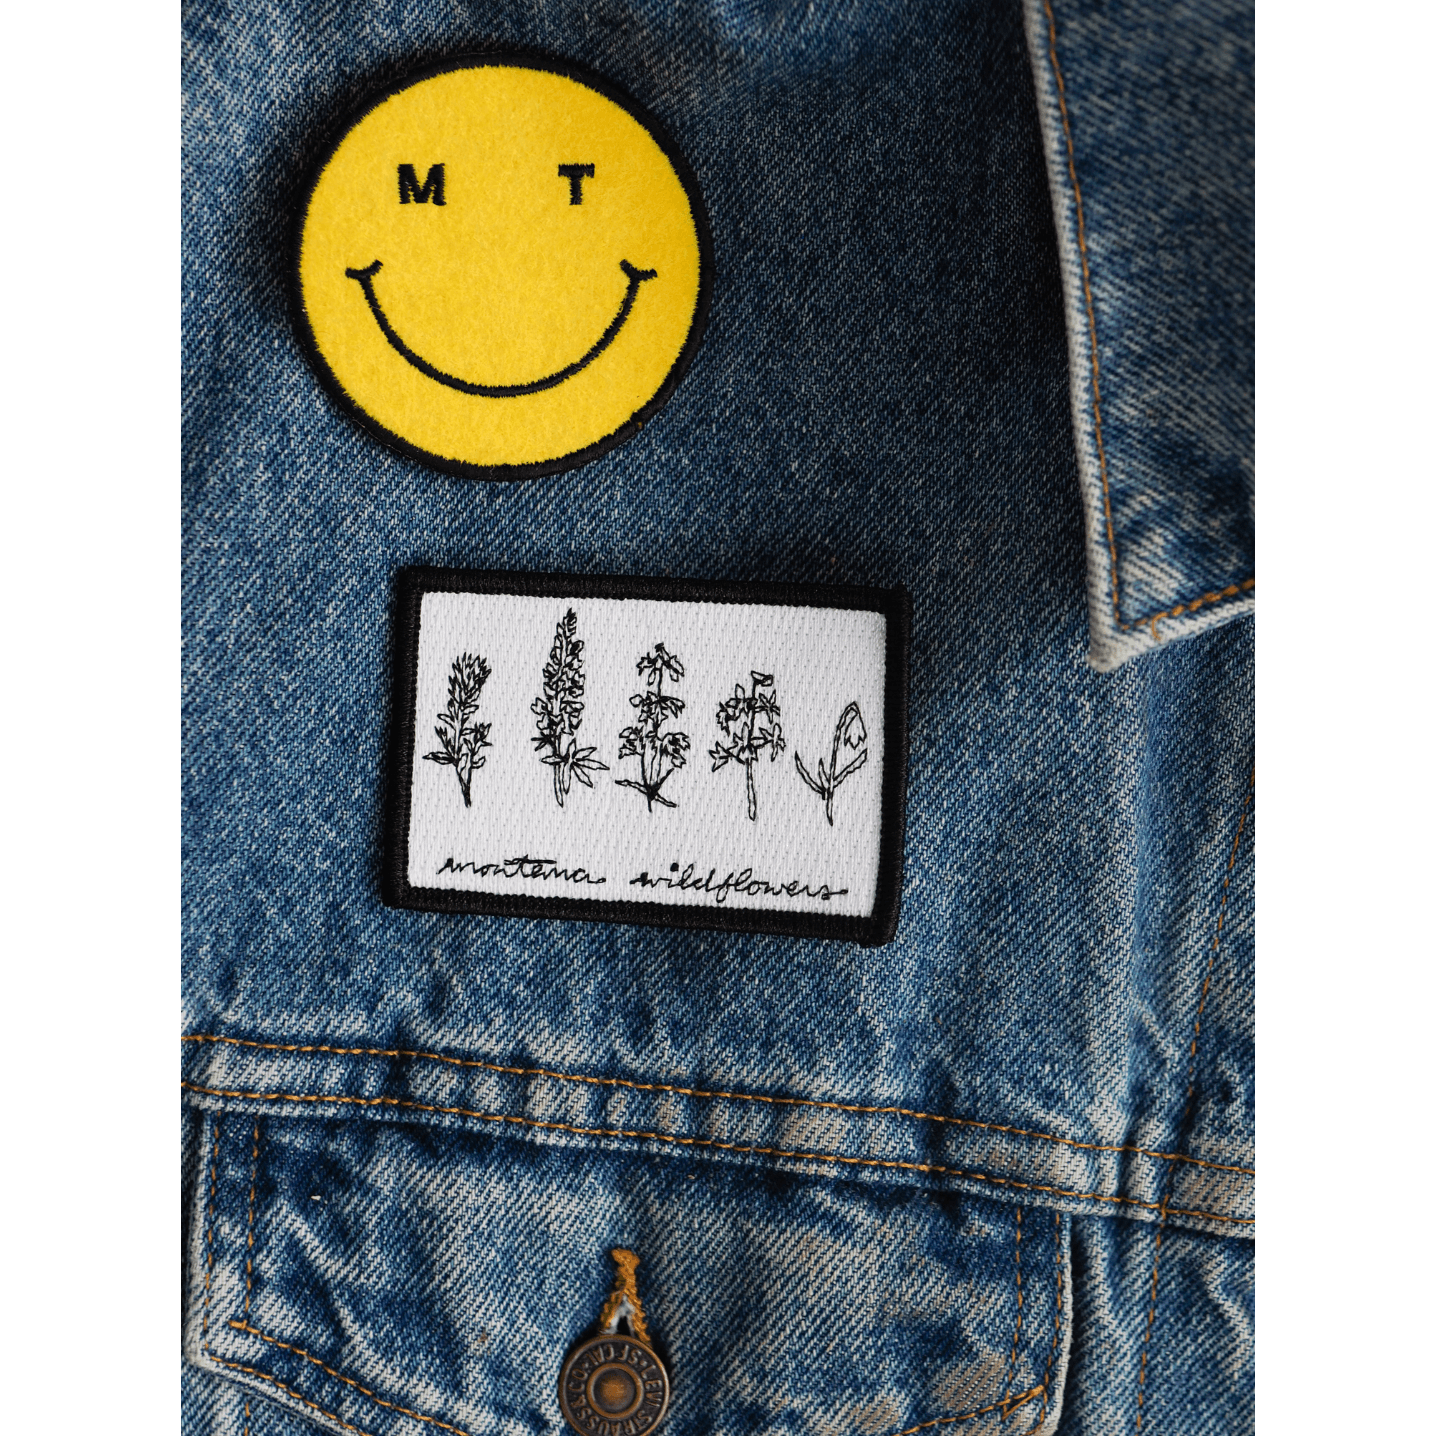 Smiley Patch - Intrigue Ink Visit Bozeman, Unique Shopping Boutique in Montana, Work from Home Clothes for Women